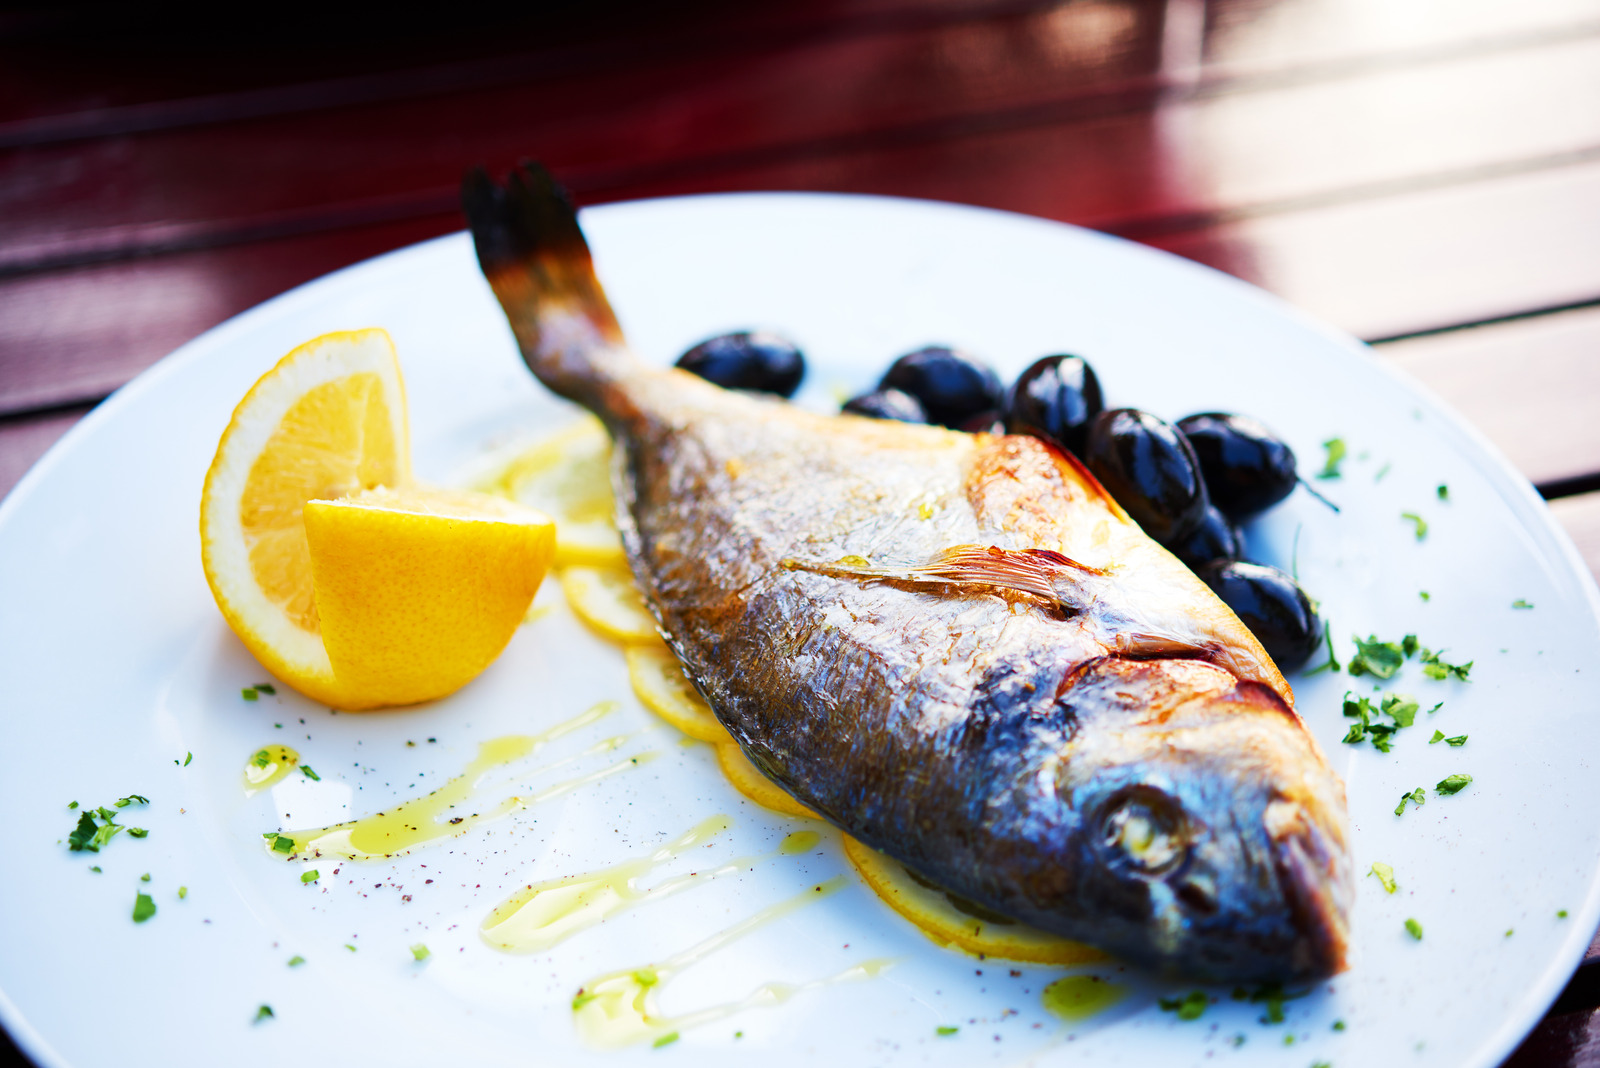 cooked fish - bream near lemon and black olives on plate.